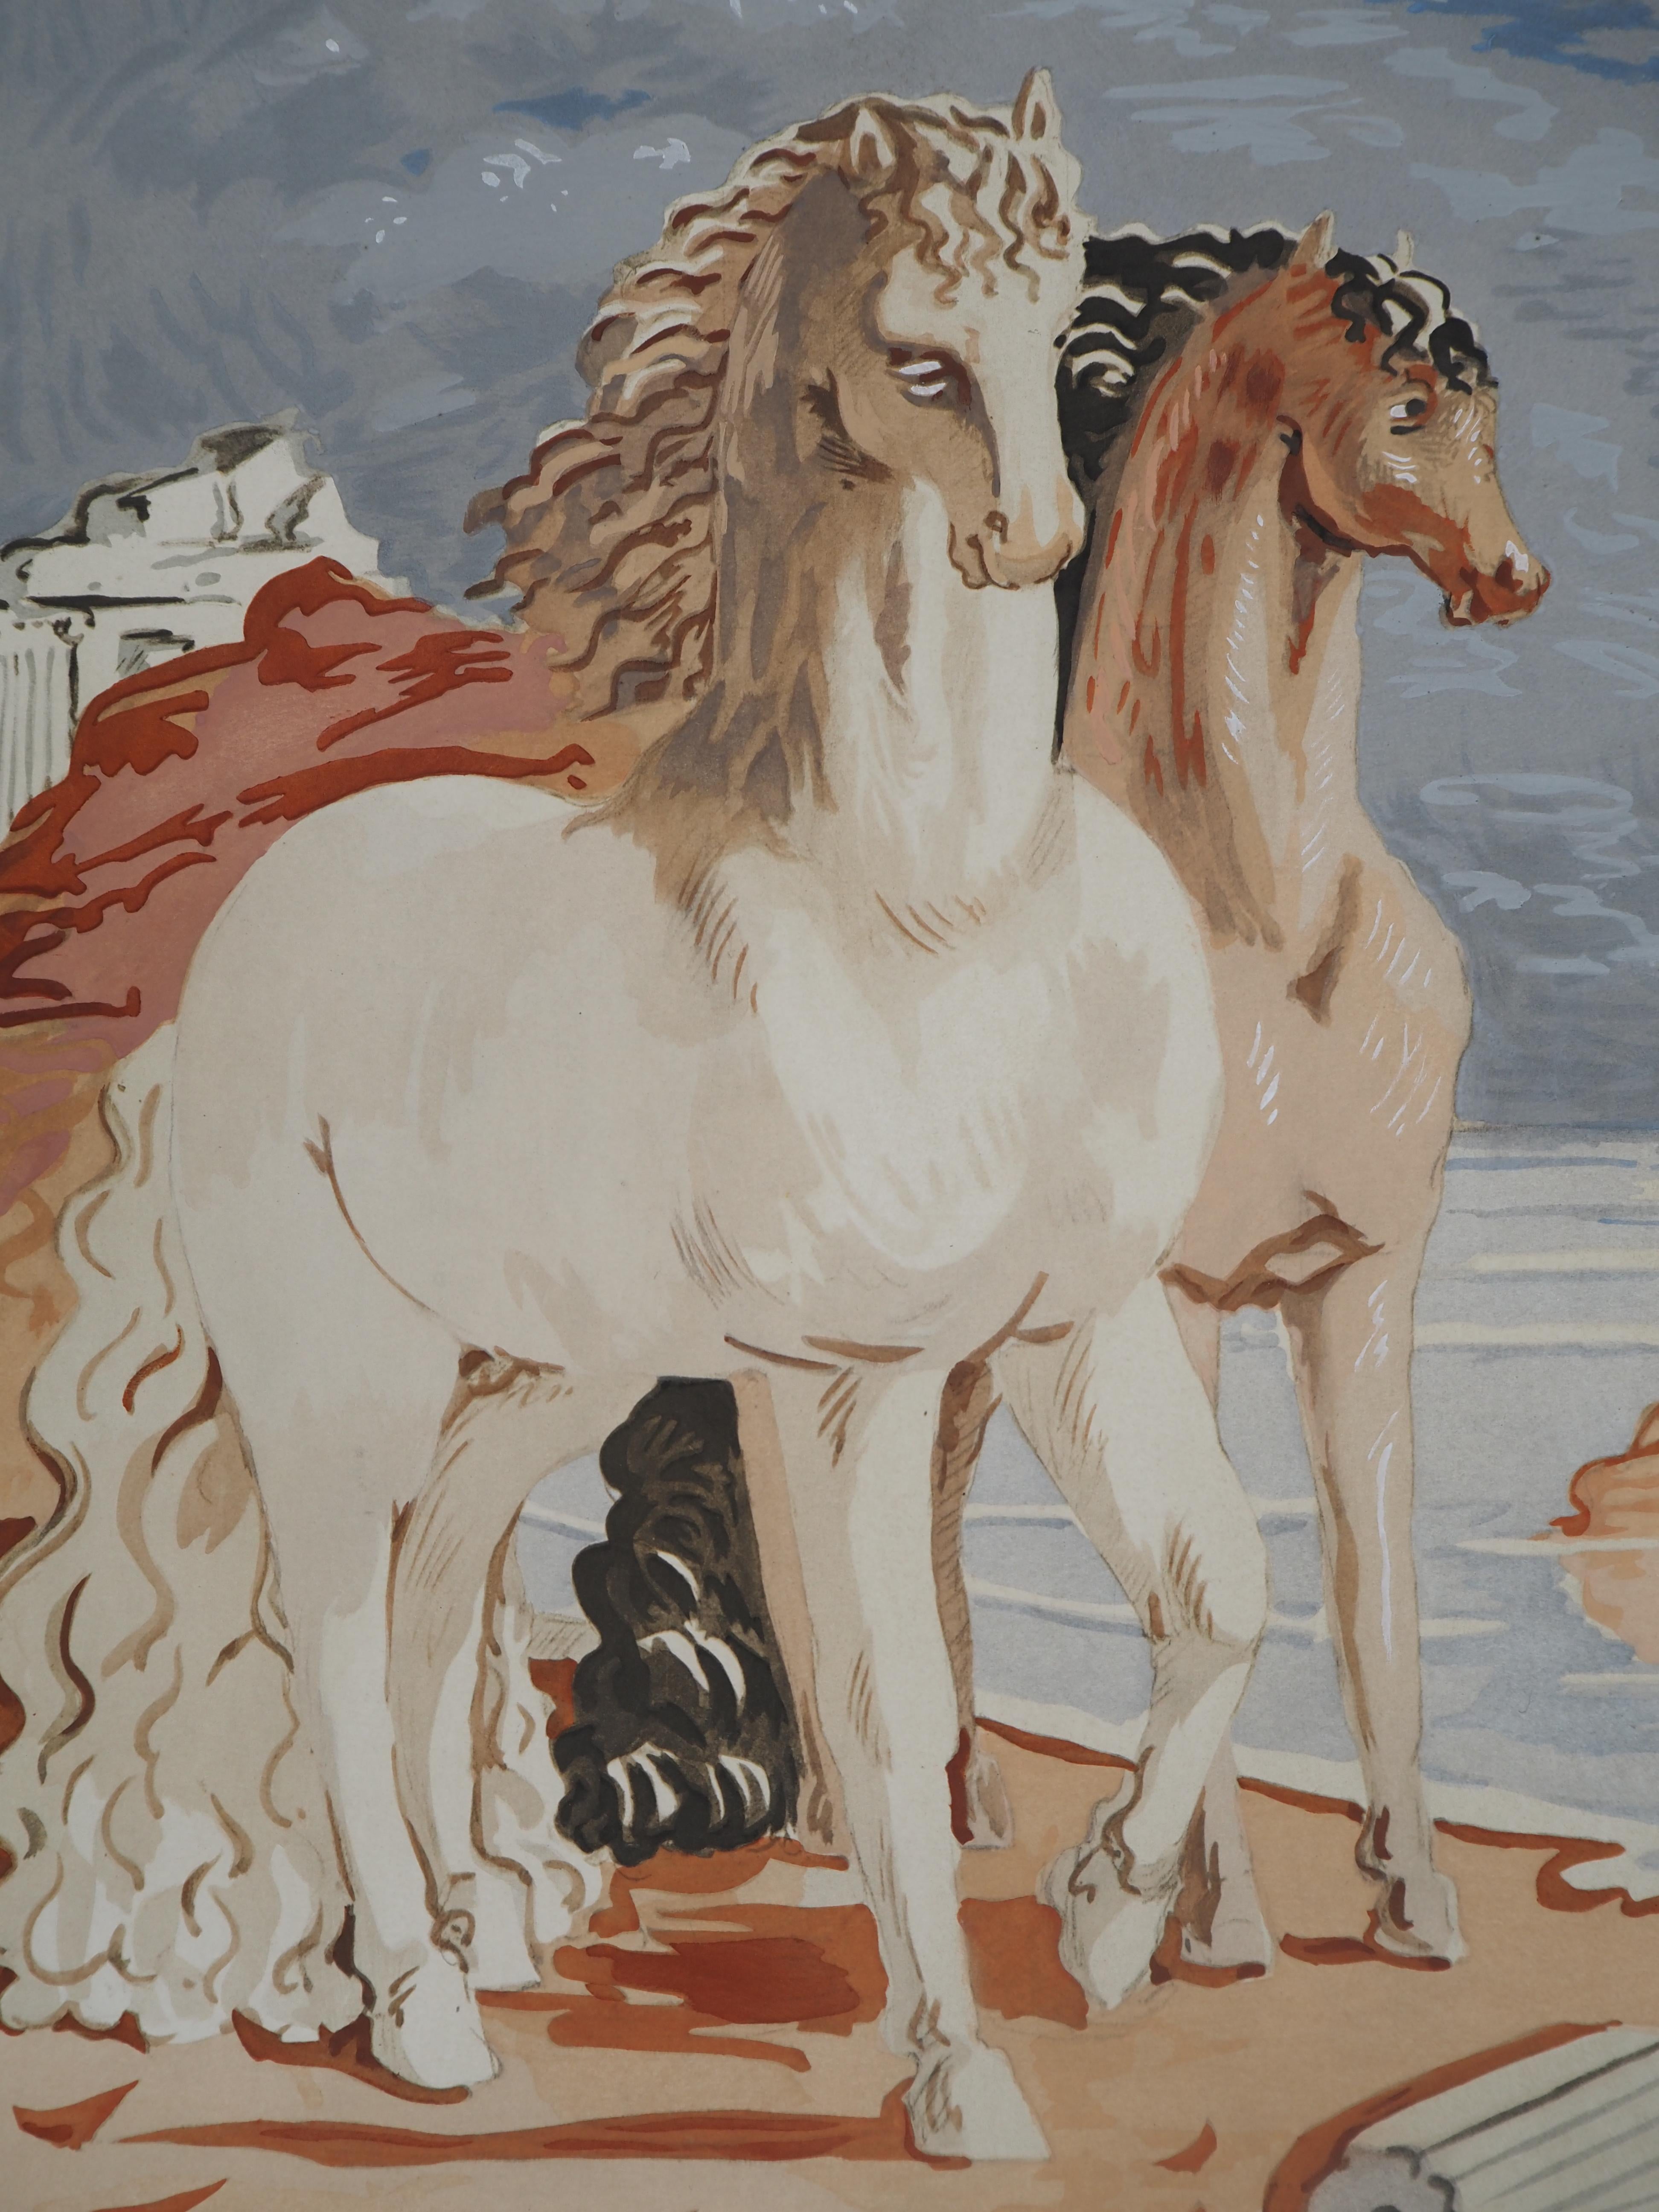 Giorgio de CHIRICO
Horses in a Mythological Landscape, c. 1955

Lithograph and stencil (Jacomet workshop)
Printed signature in the plate
On light vellum 48 x 38 cm (c. 19 x 15 in)

Very good condition, light defects at the edge of the sheet